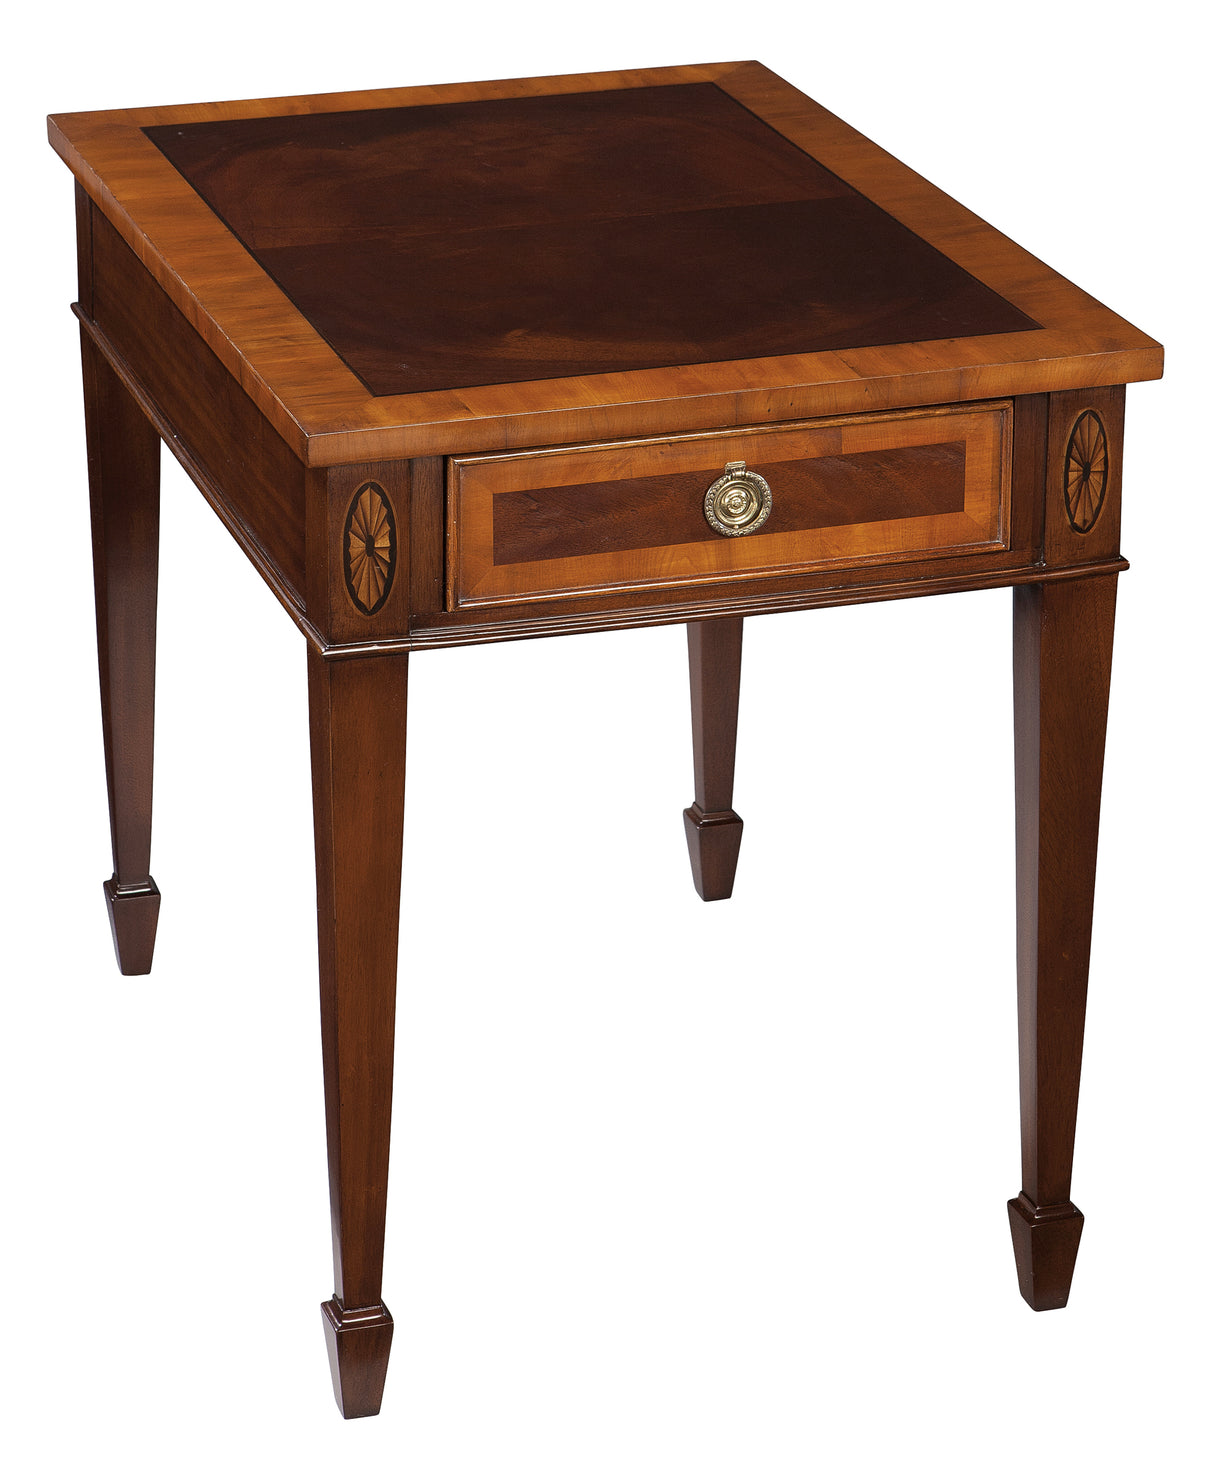 Hekman 22503 Copley Place 19in. x 26in. x 23.25in. End Table